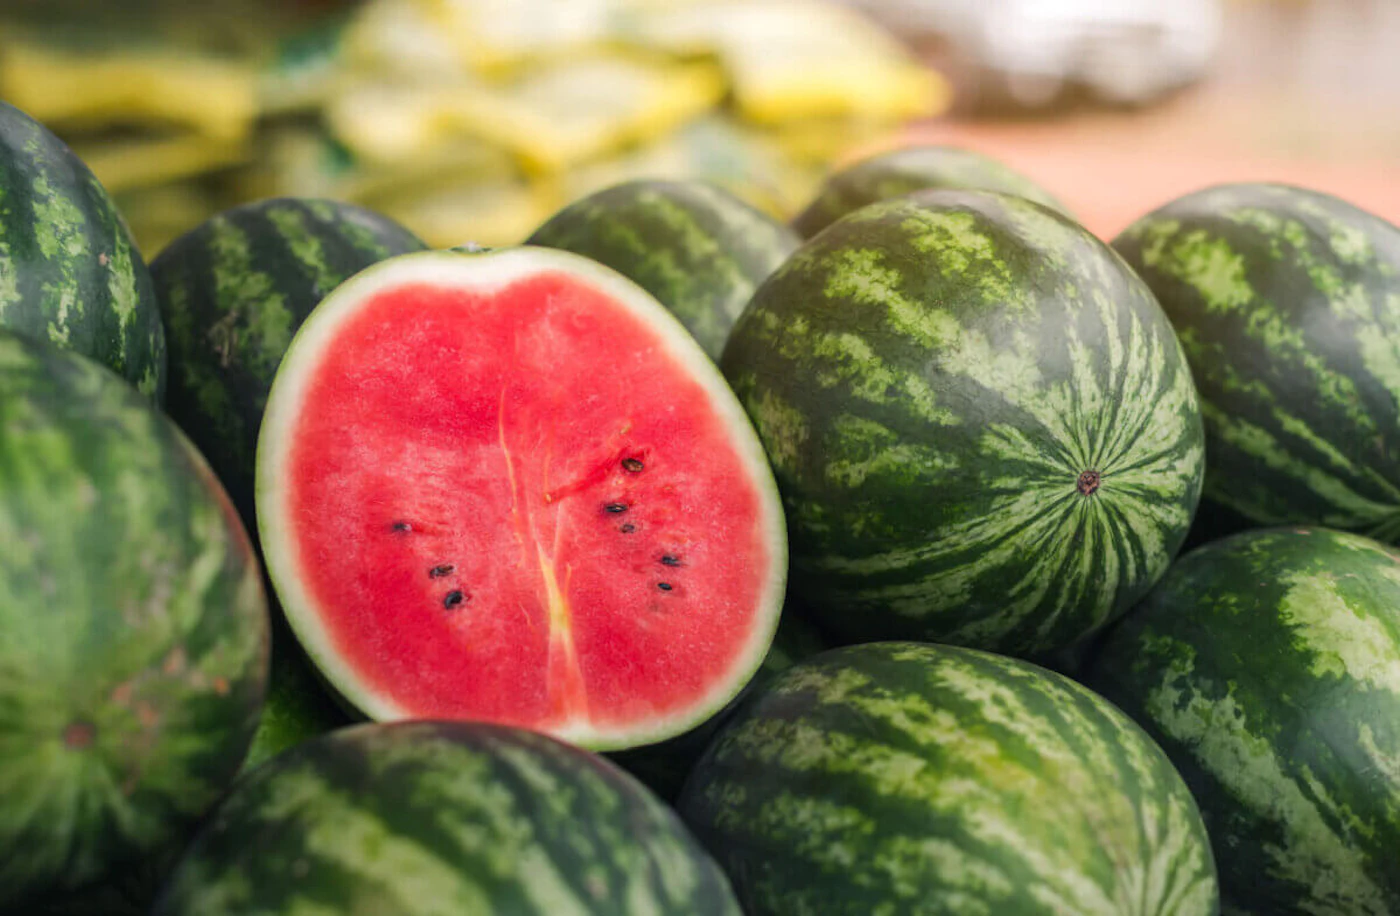 The extreme heat and dry conditions made for a rough start to watermelon season in NC, but July rains are bringing the melon back. (Shutterstock)